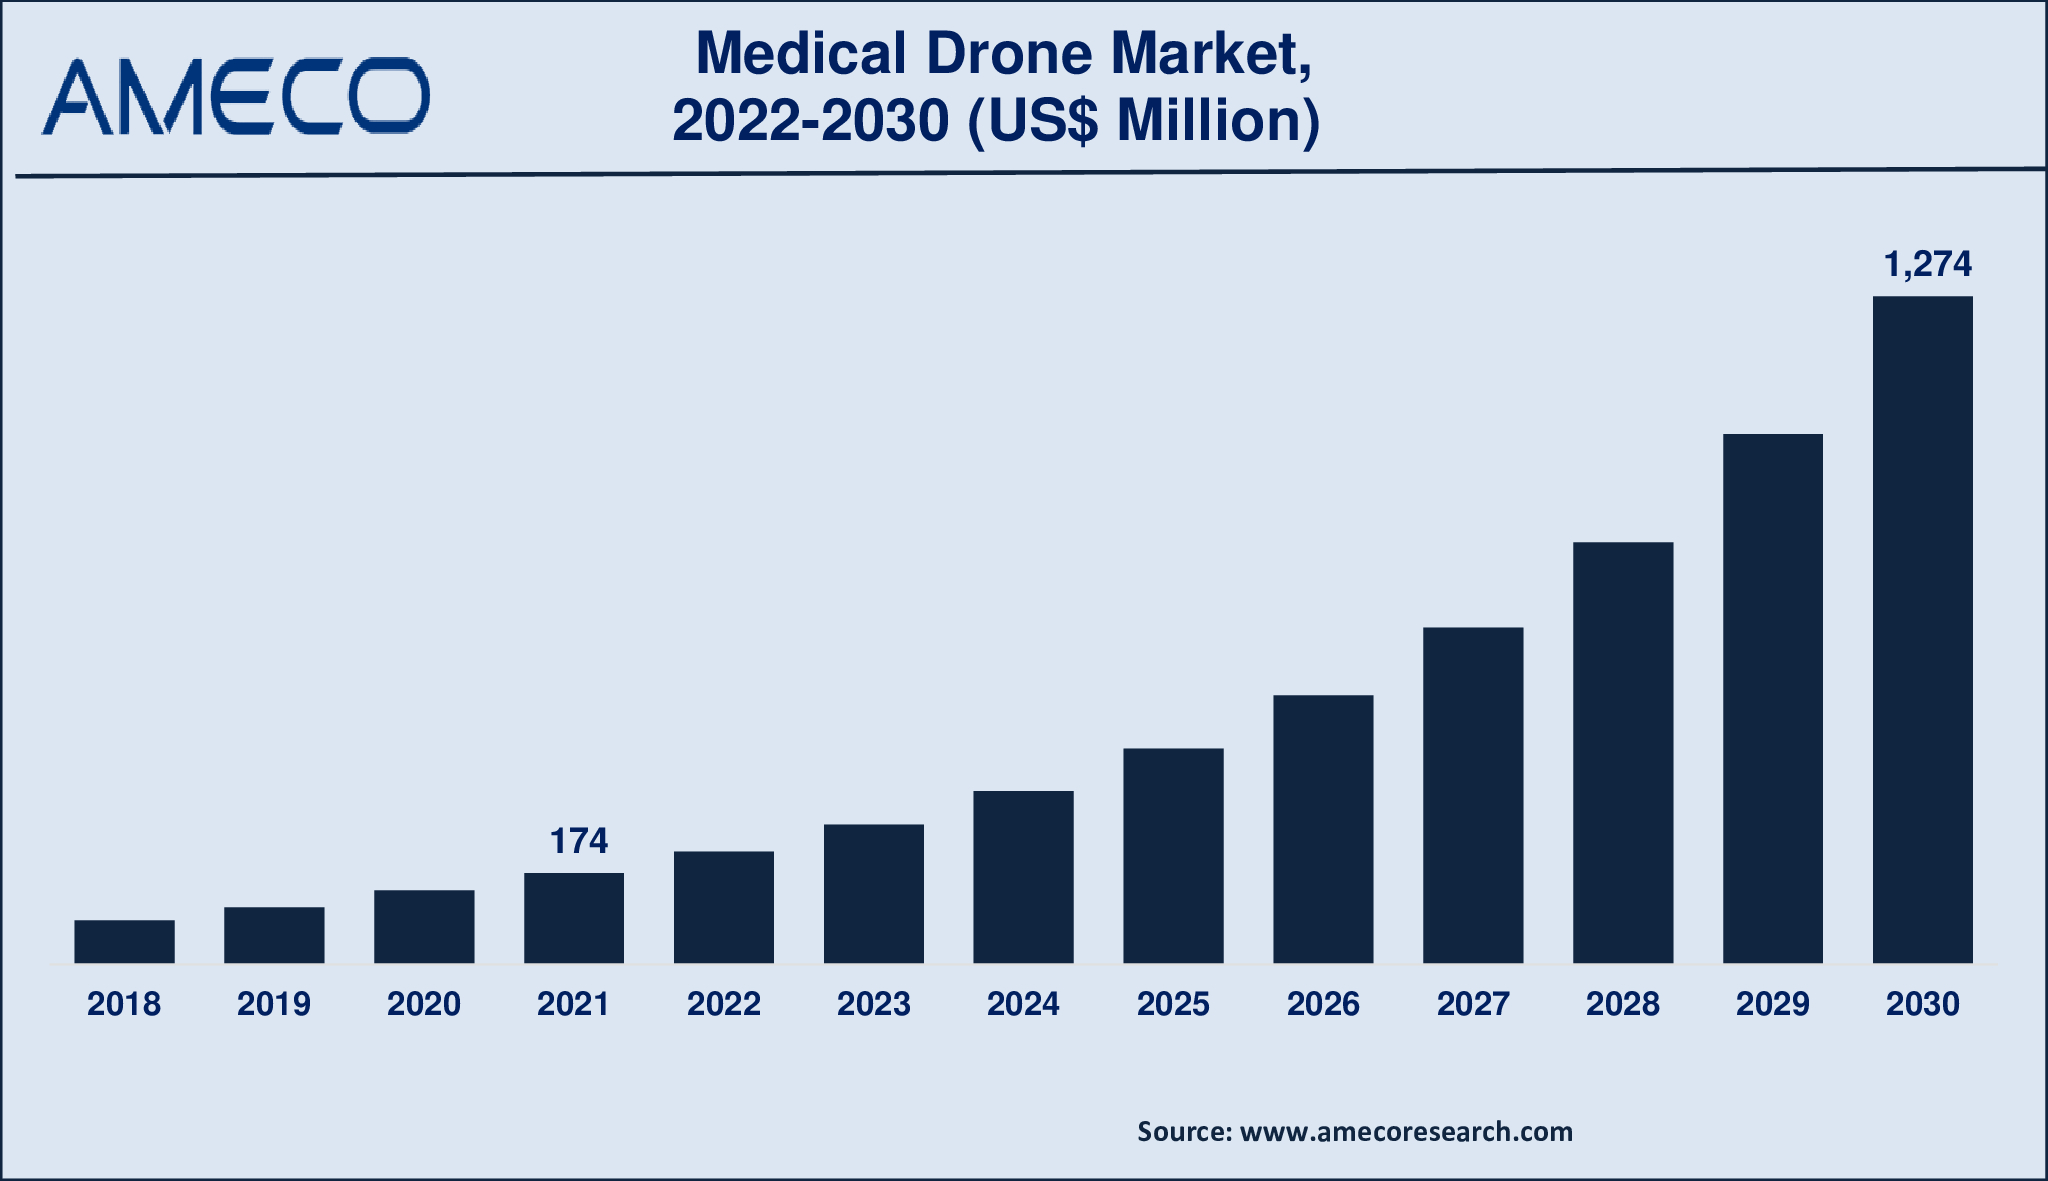 Medical Drone Market Size, Share, Growth, Trends, and Forecast 2022-2030